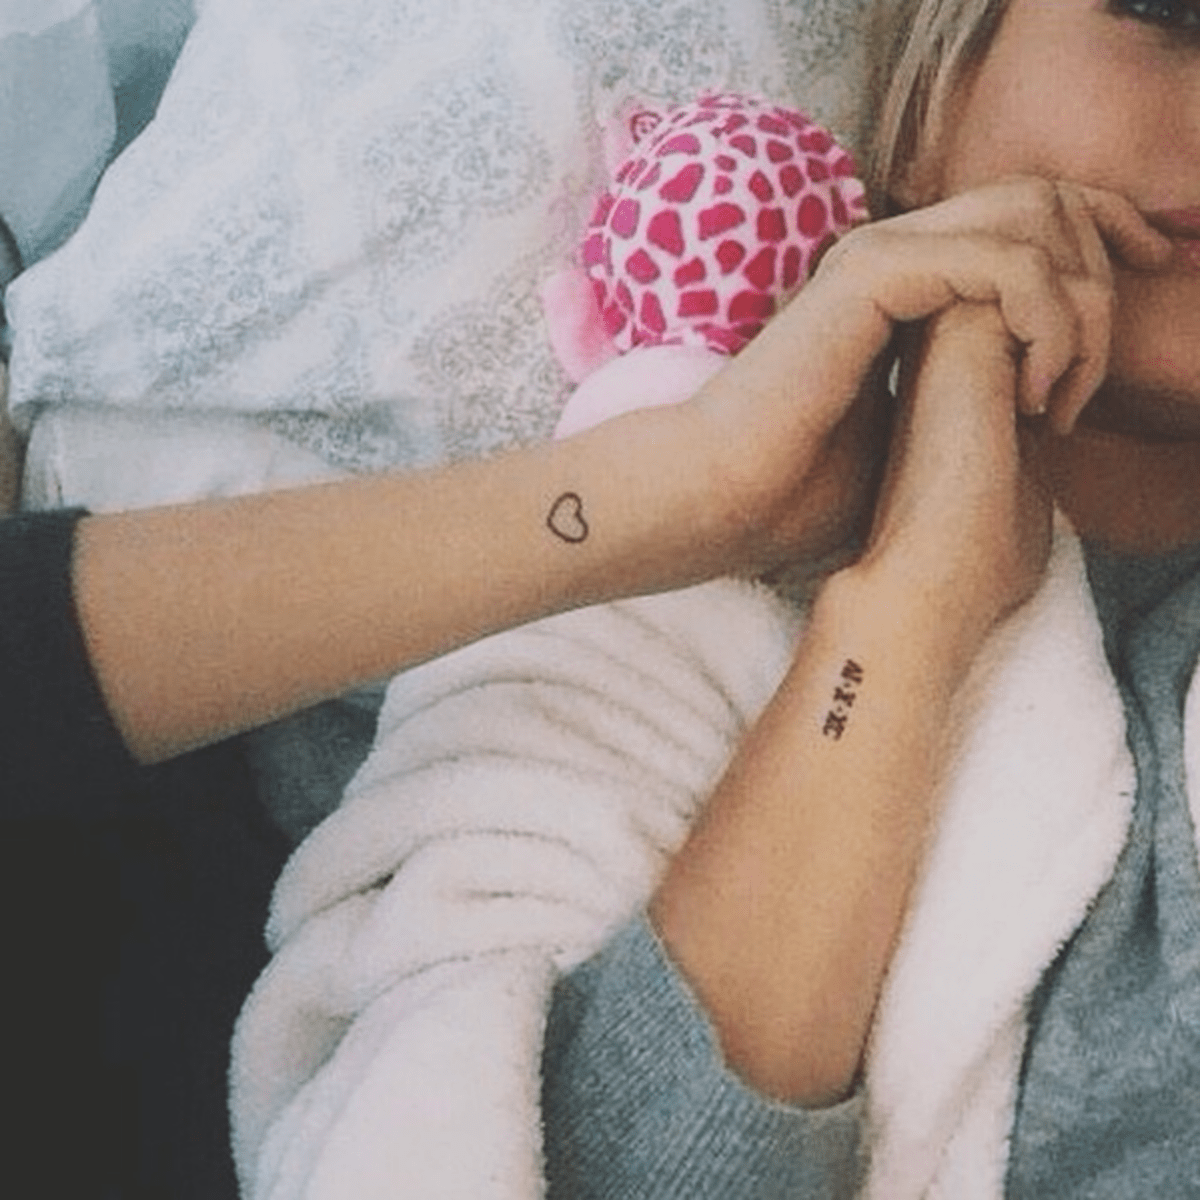 Hailey Baldwin First Tattoo Honors Parents - Tattoo Ideas, Artists and  Models